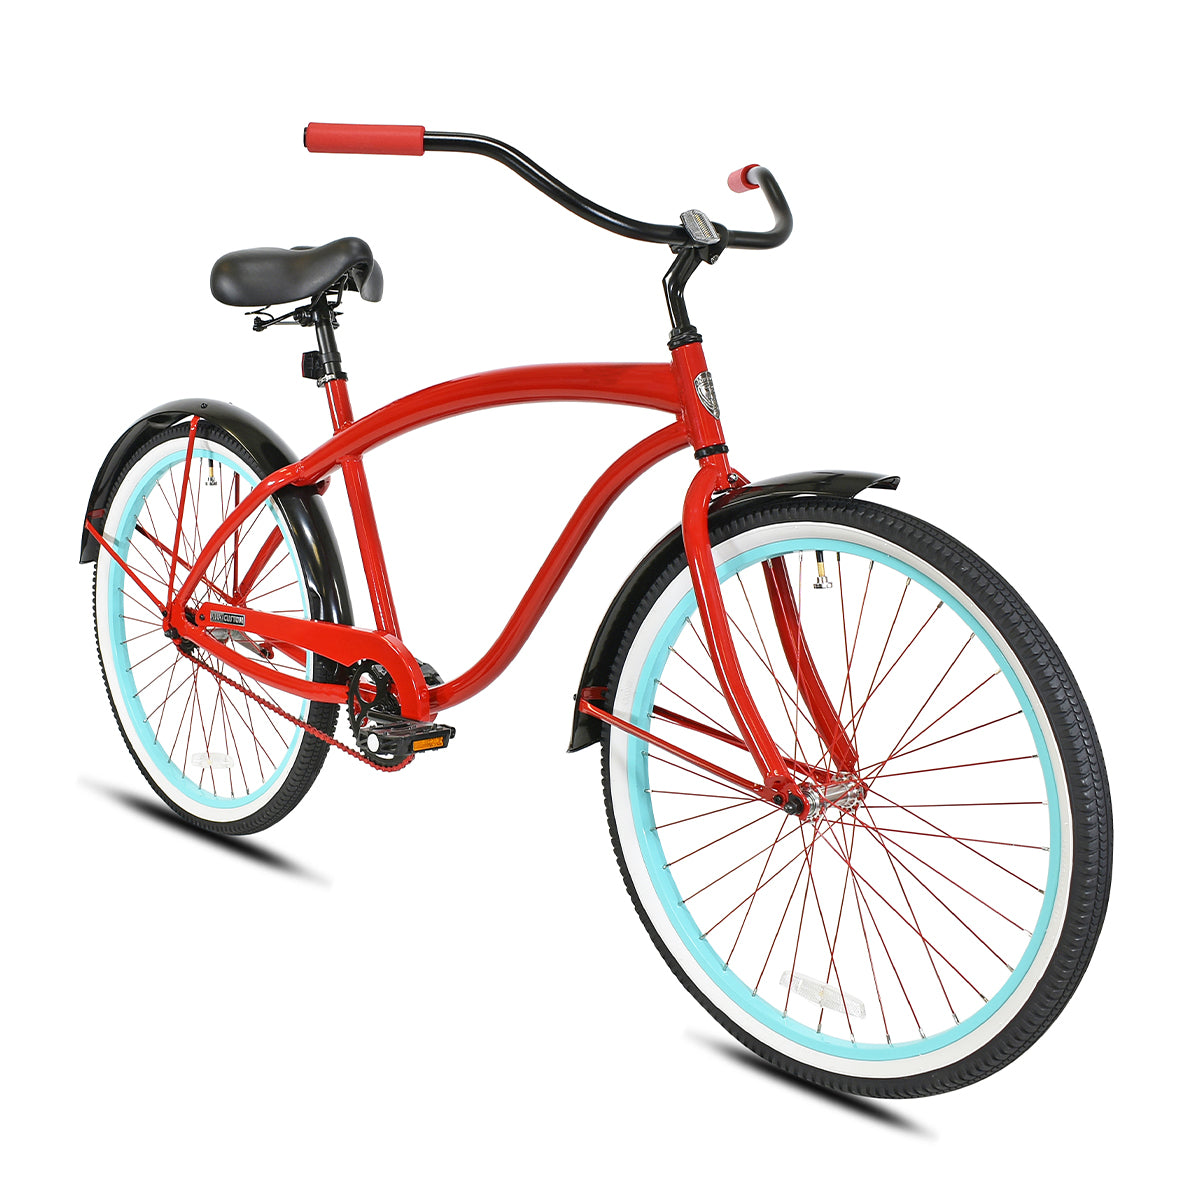 Elvis Single-Speed Cruiser Red Step-Over Frame, Grips, Chain, and Fender Brace with Black Handlebar, Saddle, Fenders, and Tires and Light Blue with Red Spokes